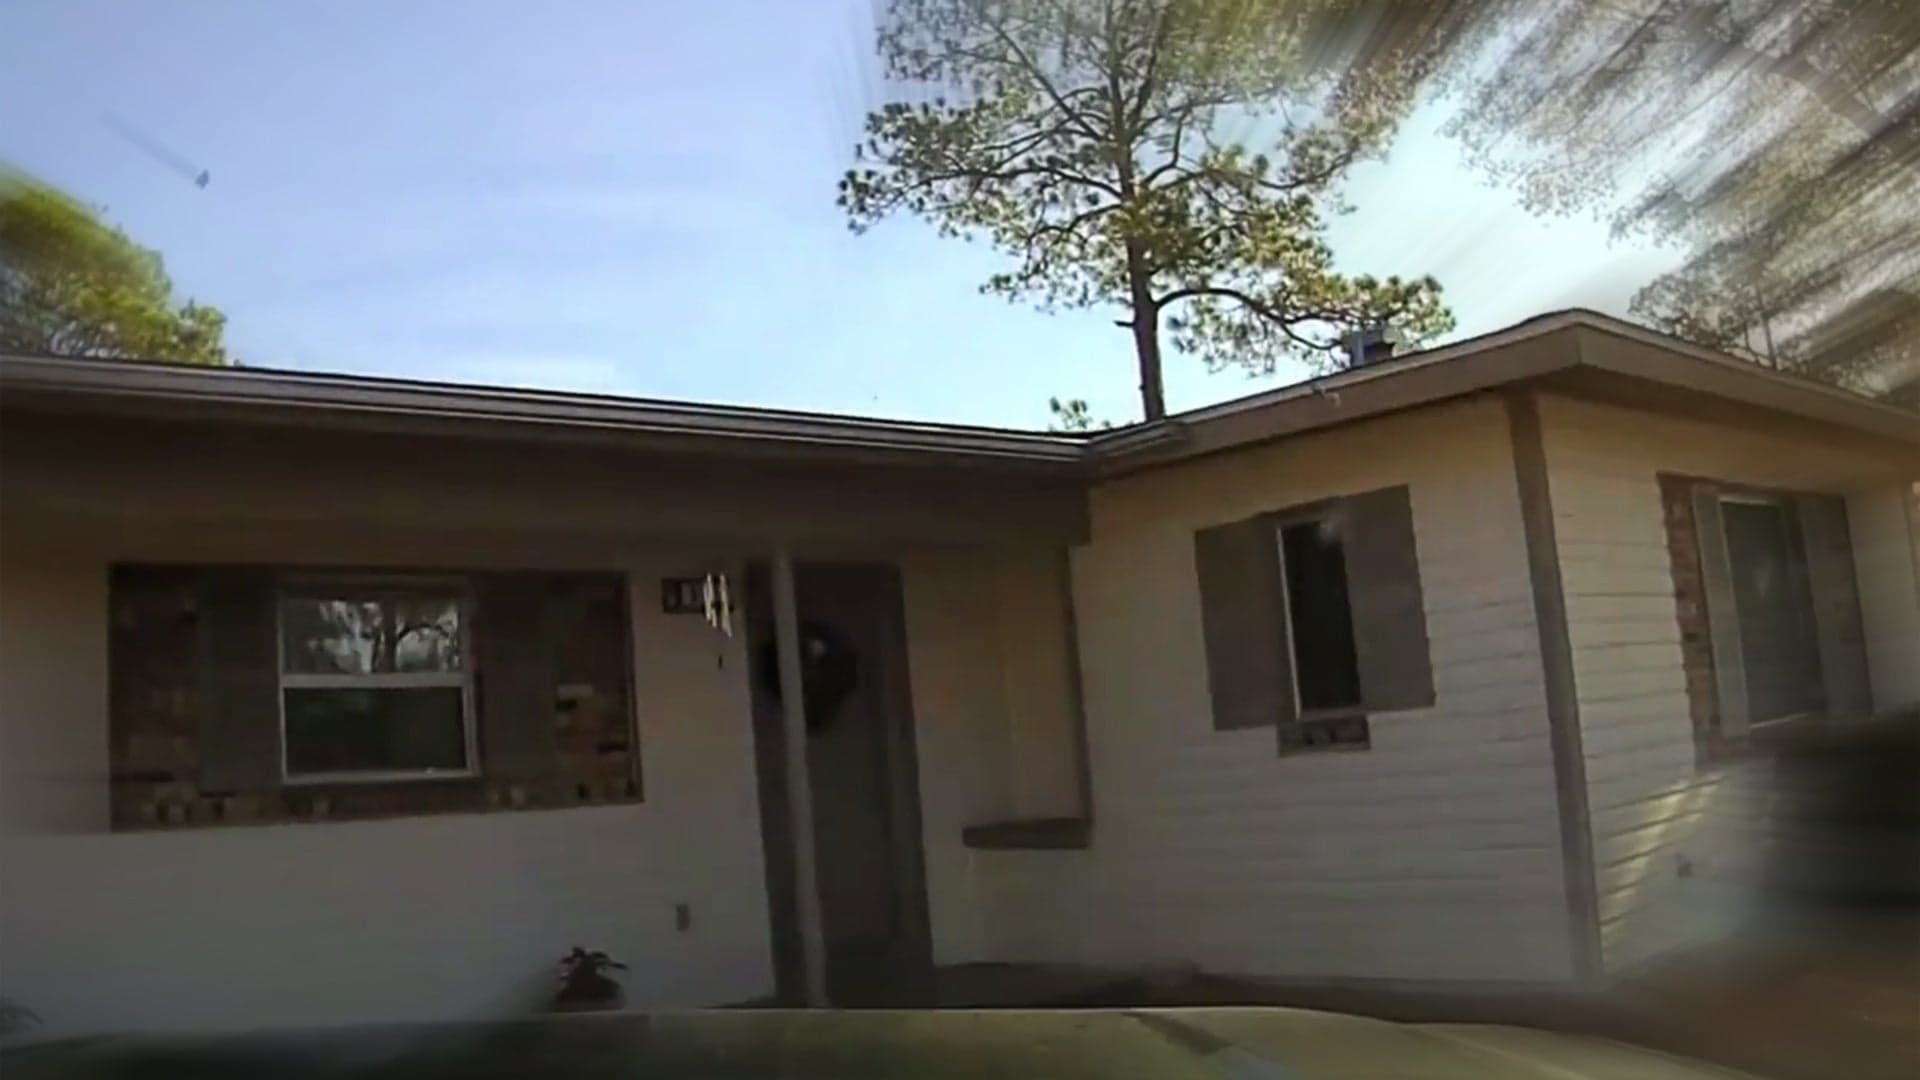 Dash Cam Video Shows Florida Cop Drive Police Truck Into Ex-Wife’s House